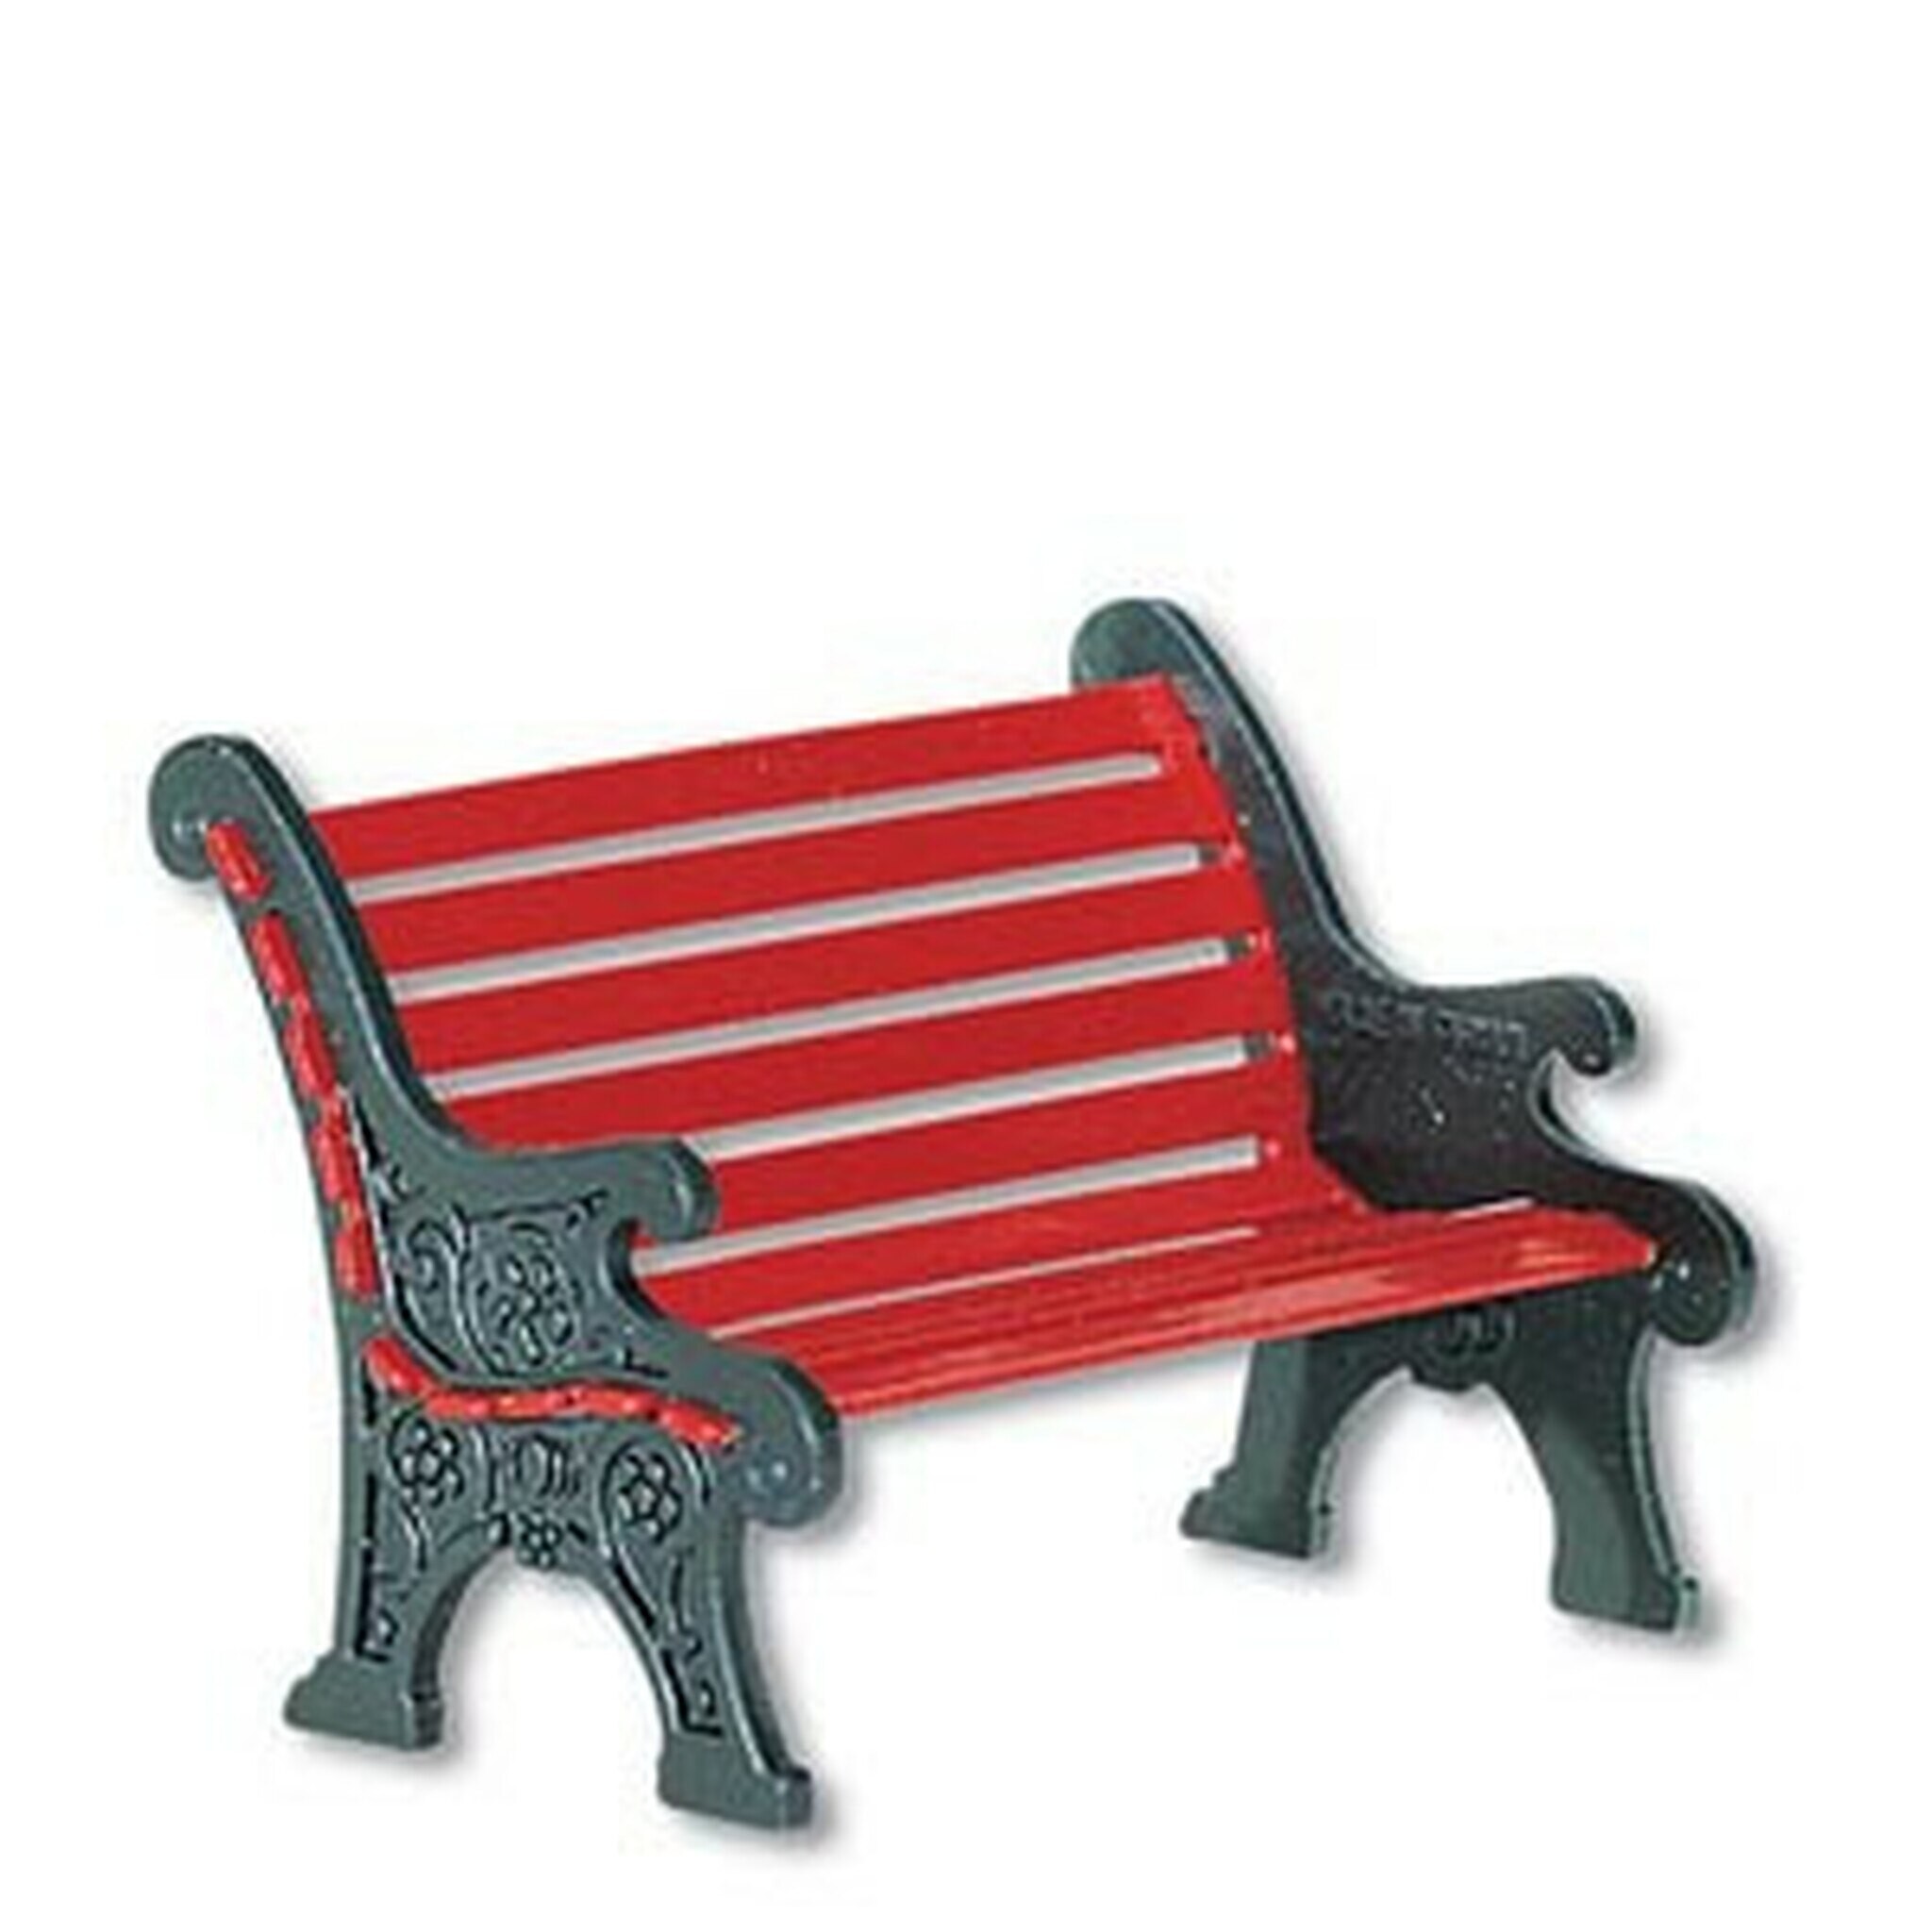 Department 56 Snow Village "Red Wrought Iron Park Bench" Accessory #56.56445